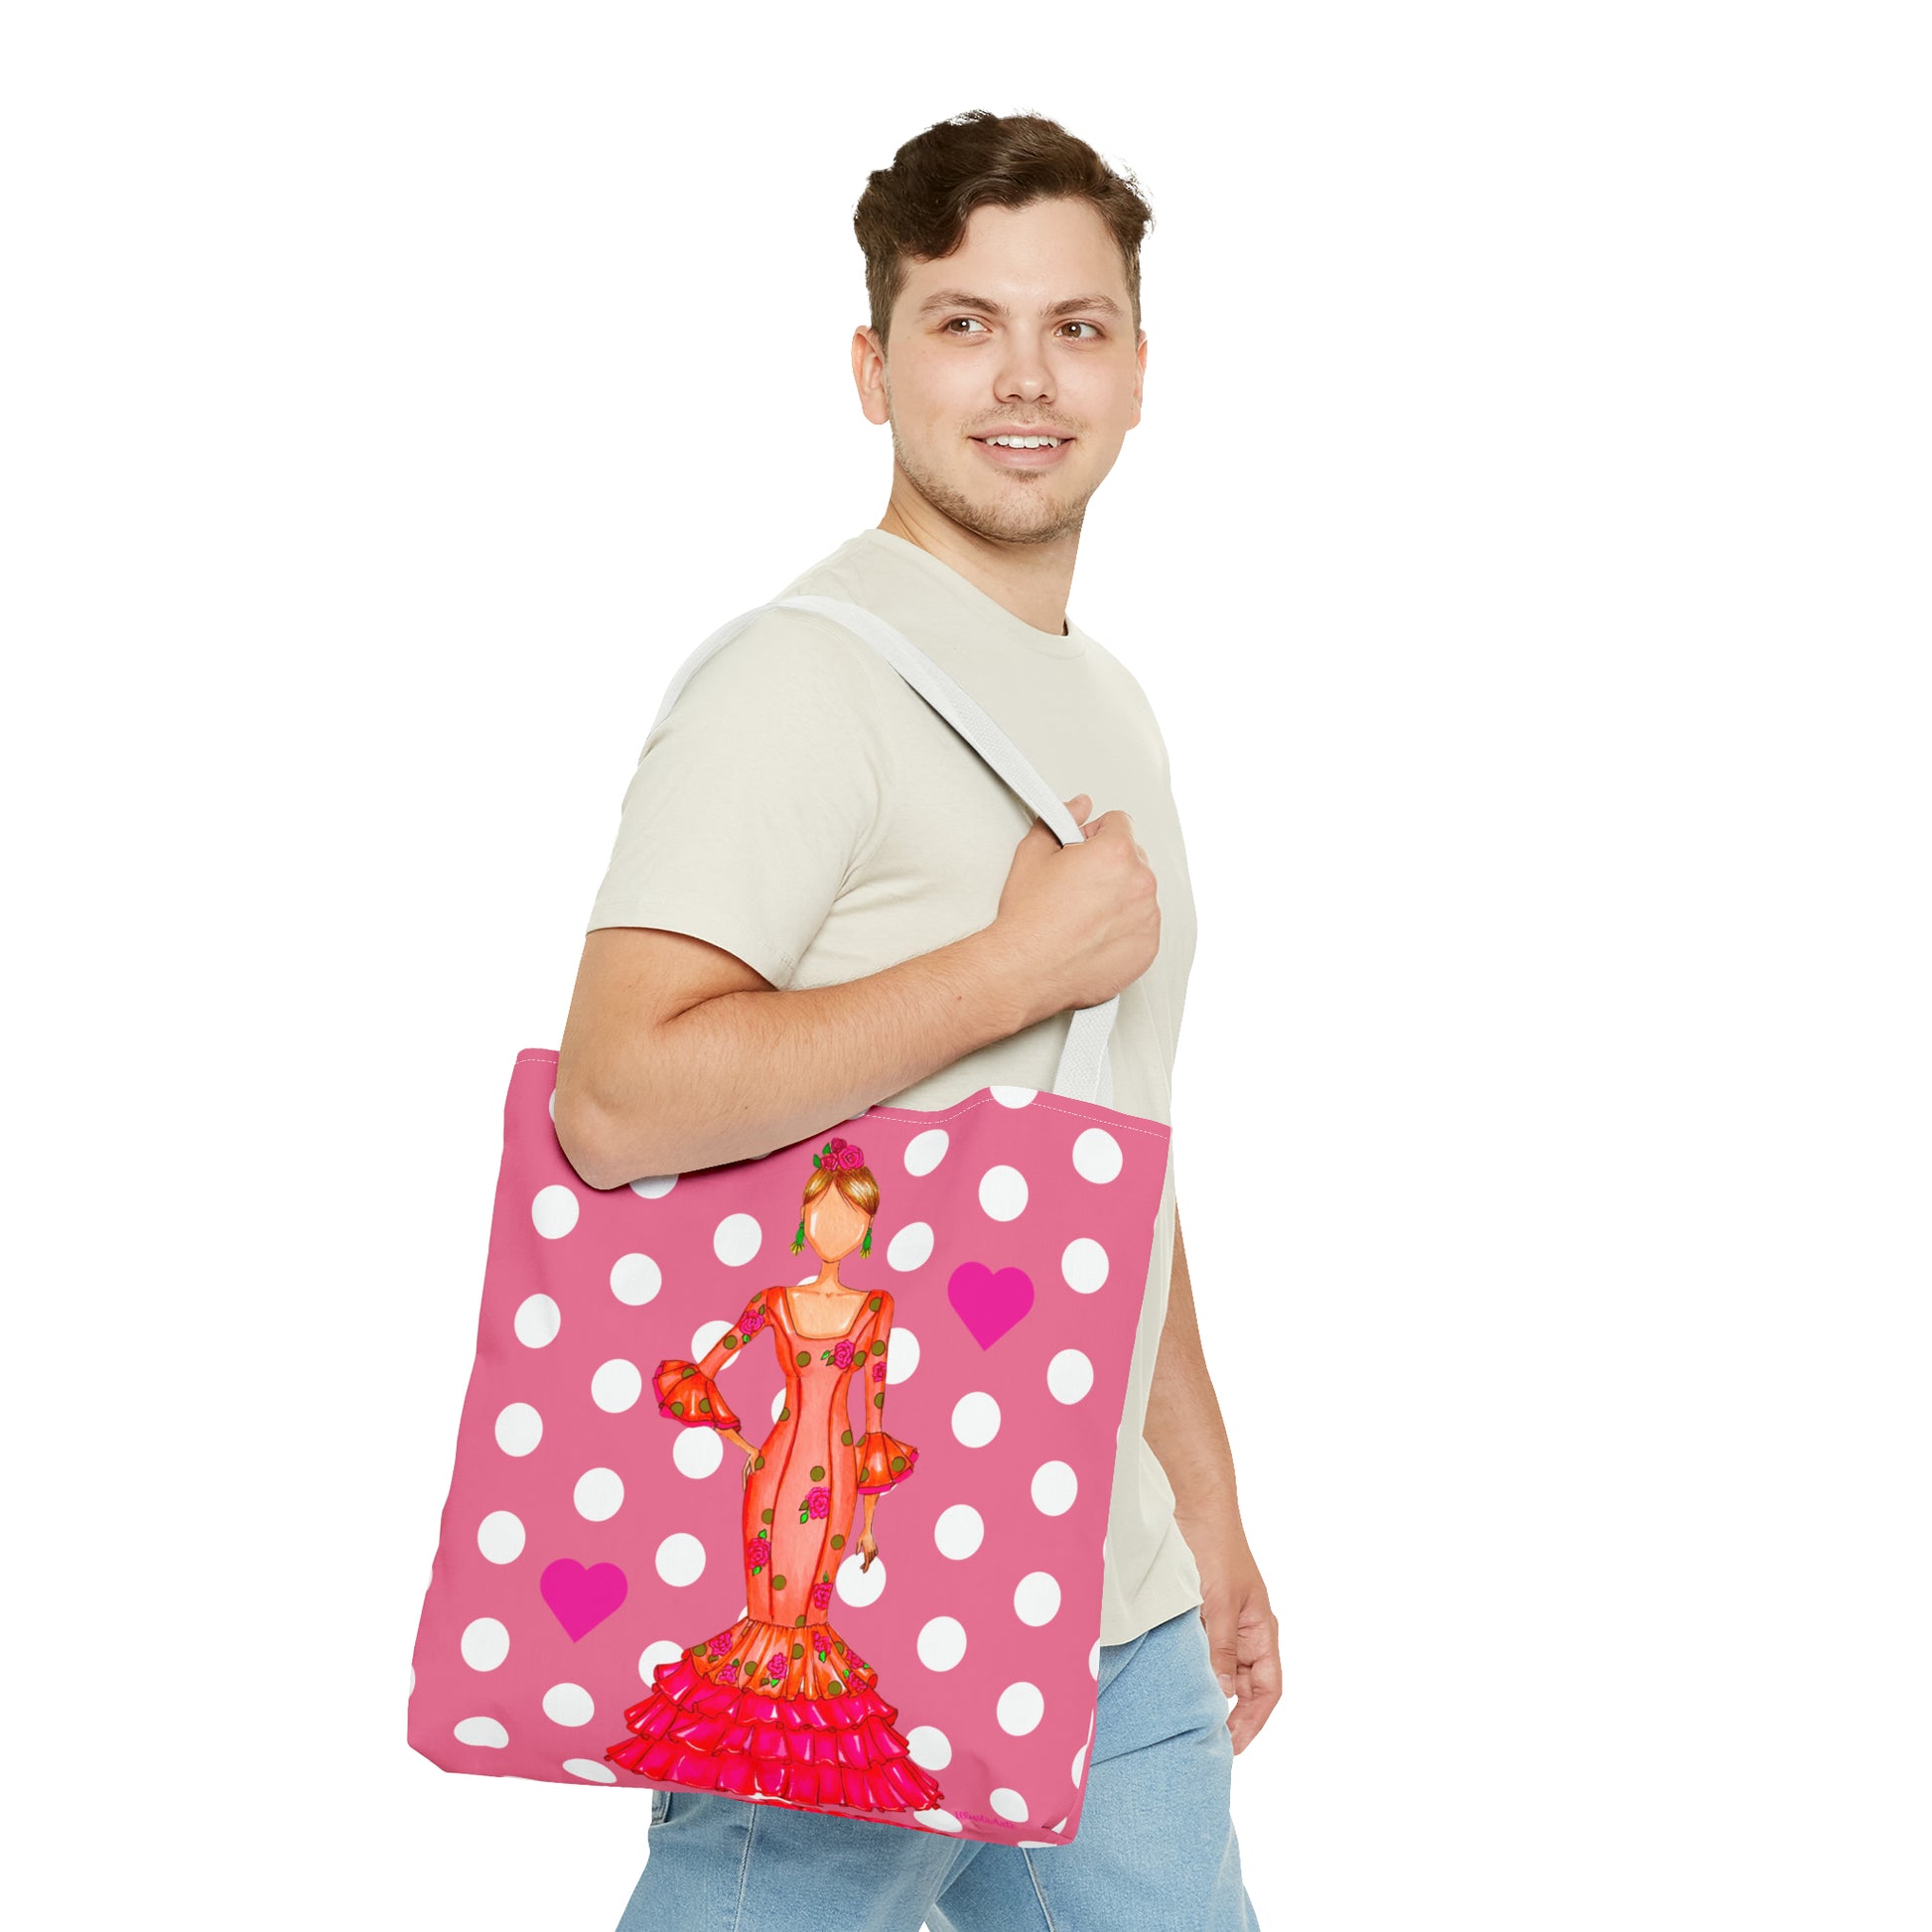 a man holding a pink and white polka dot bag